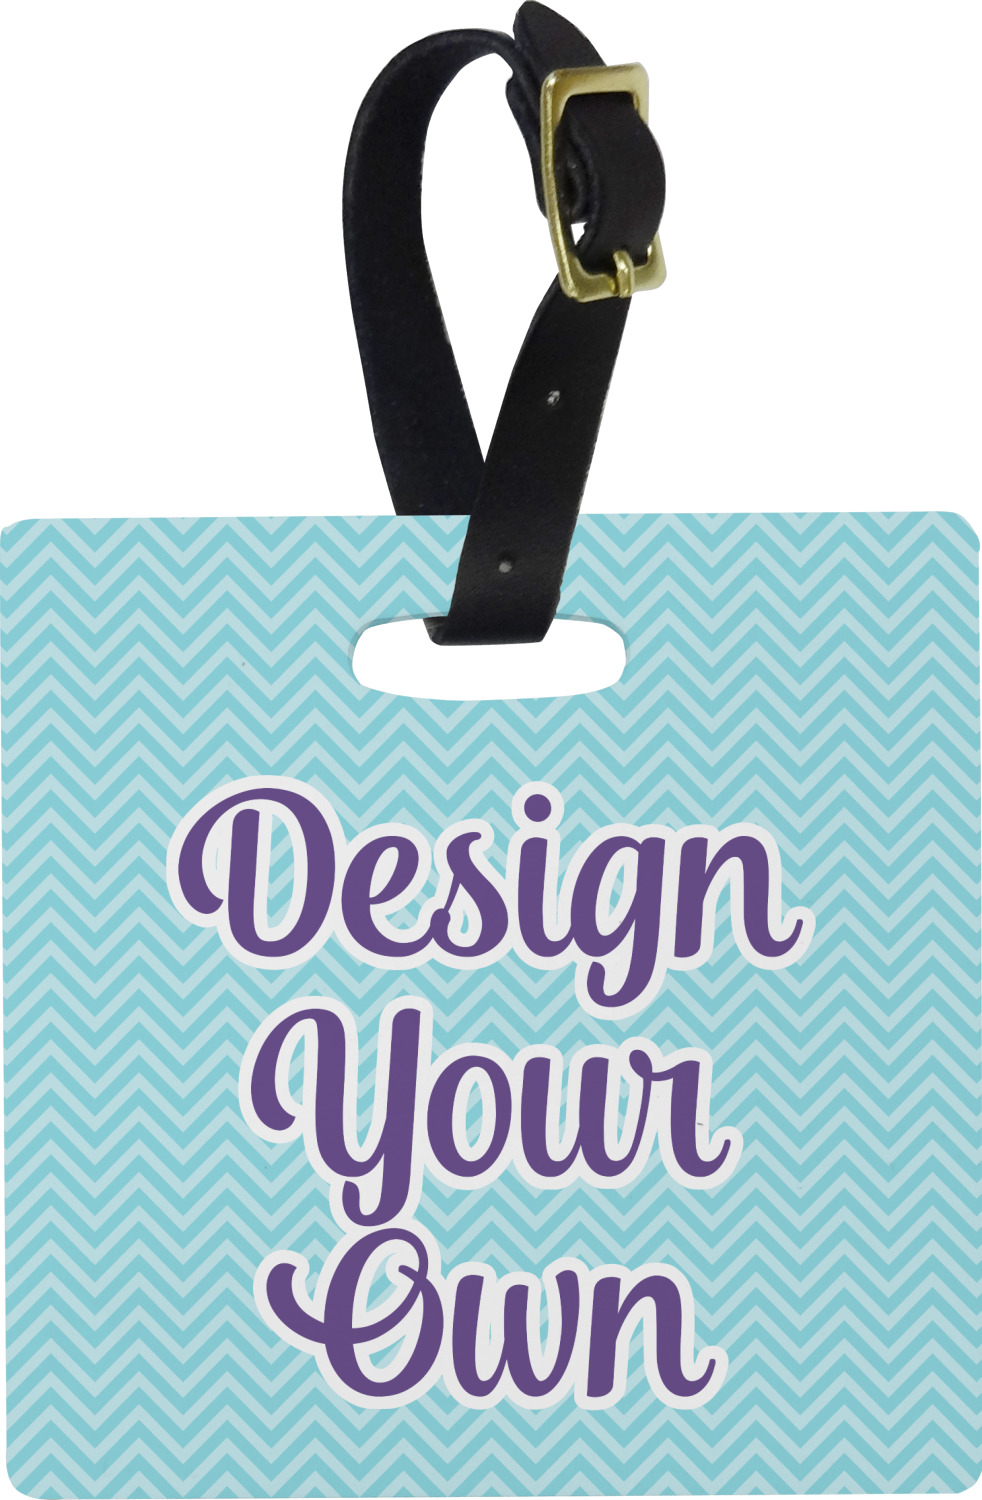 Custom Luggage Tags  Design Your Own Bag Tags